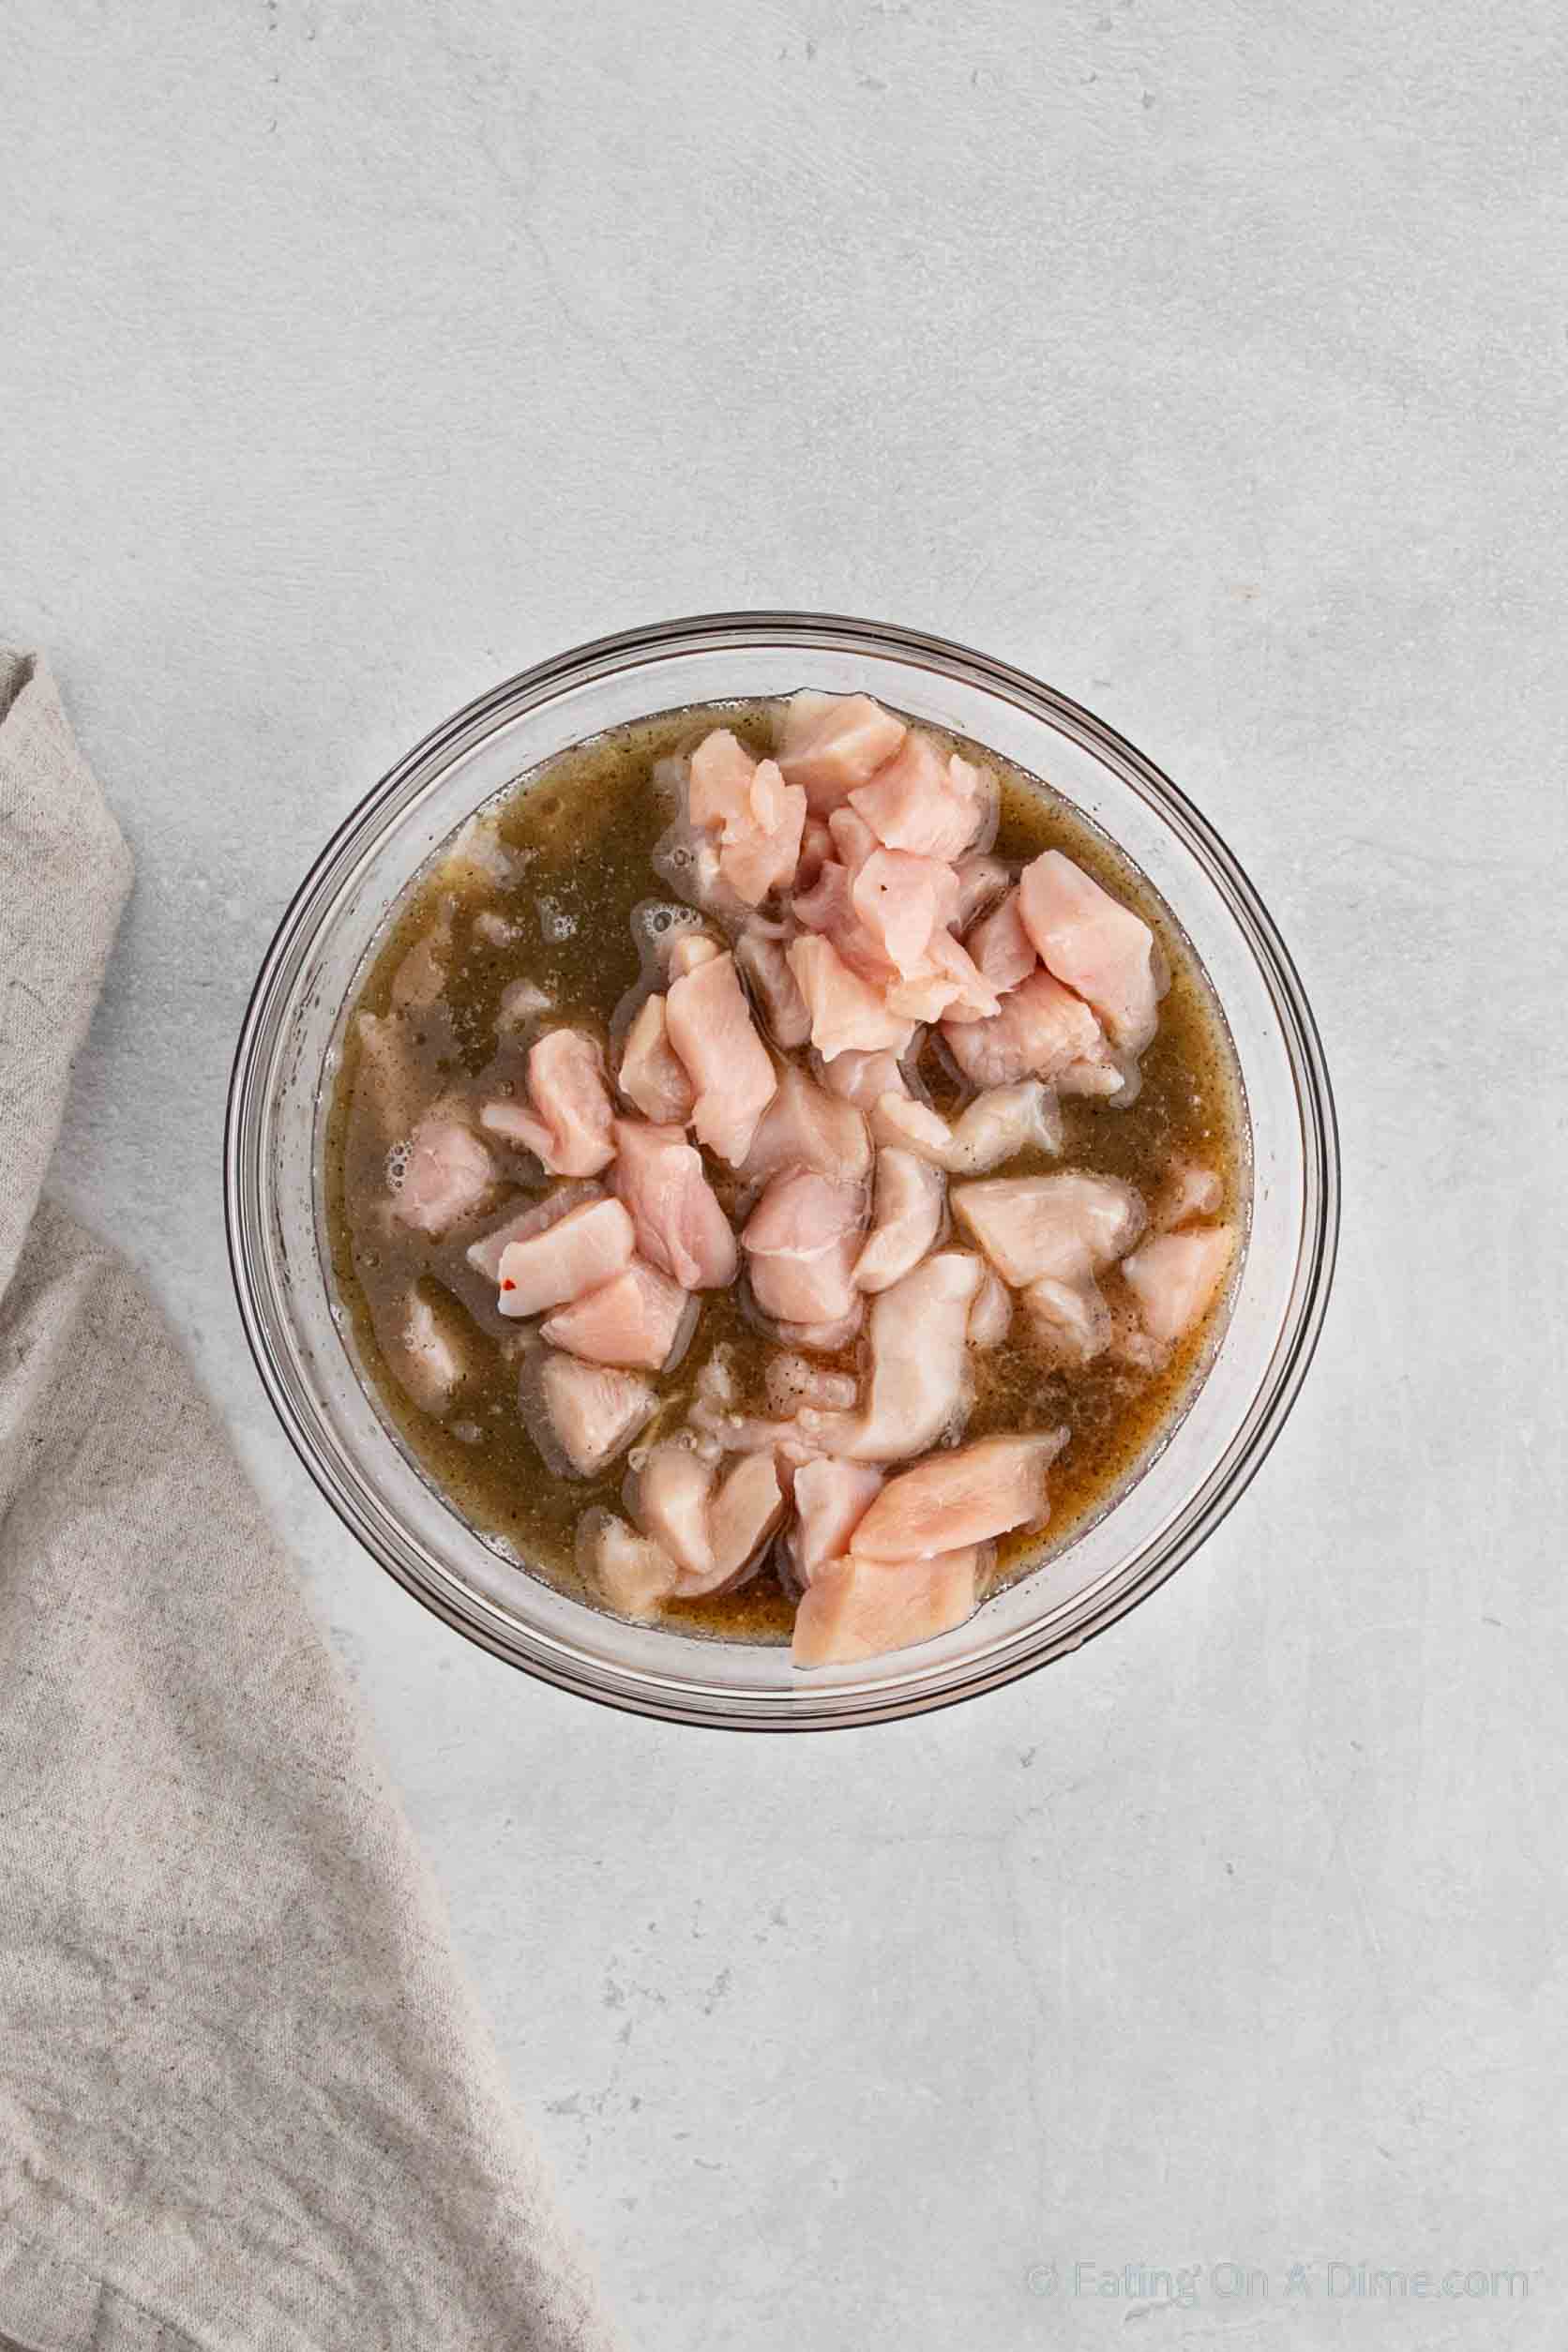 Marinating diced chicken in a bowl